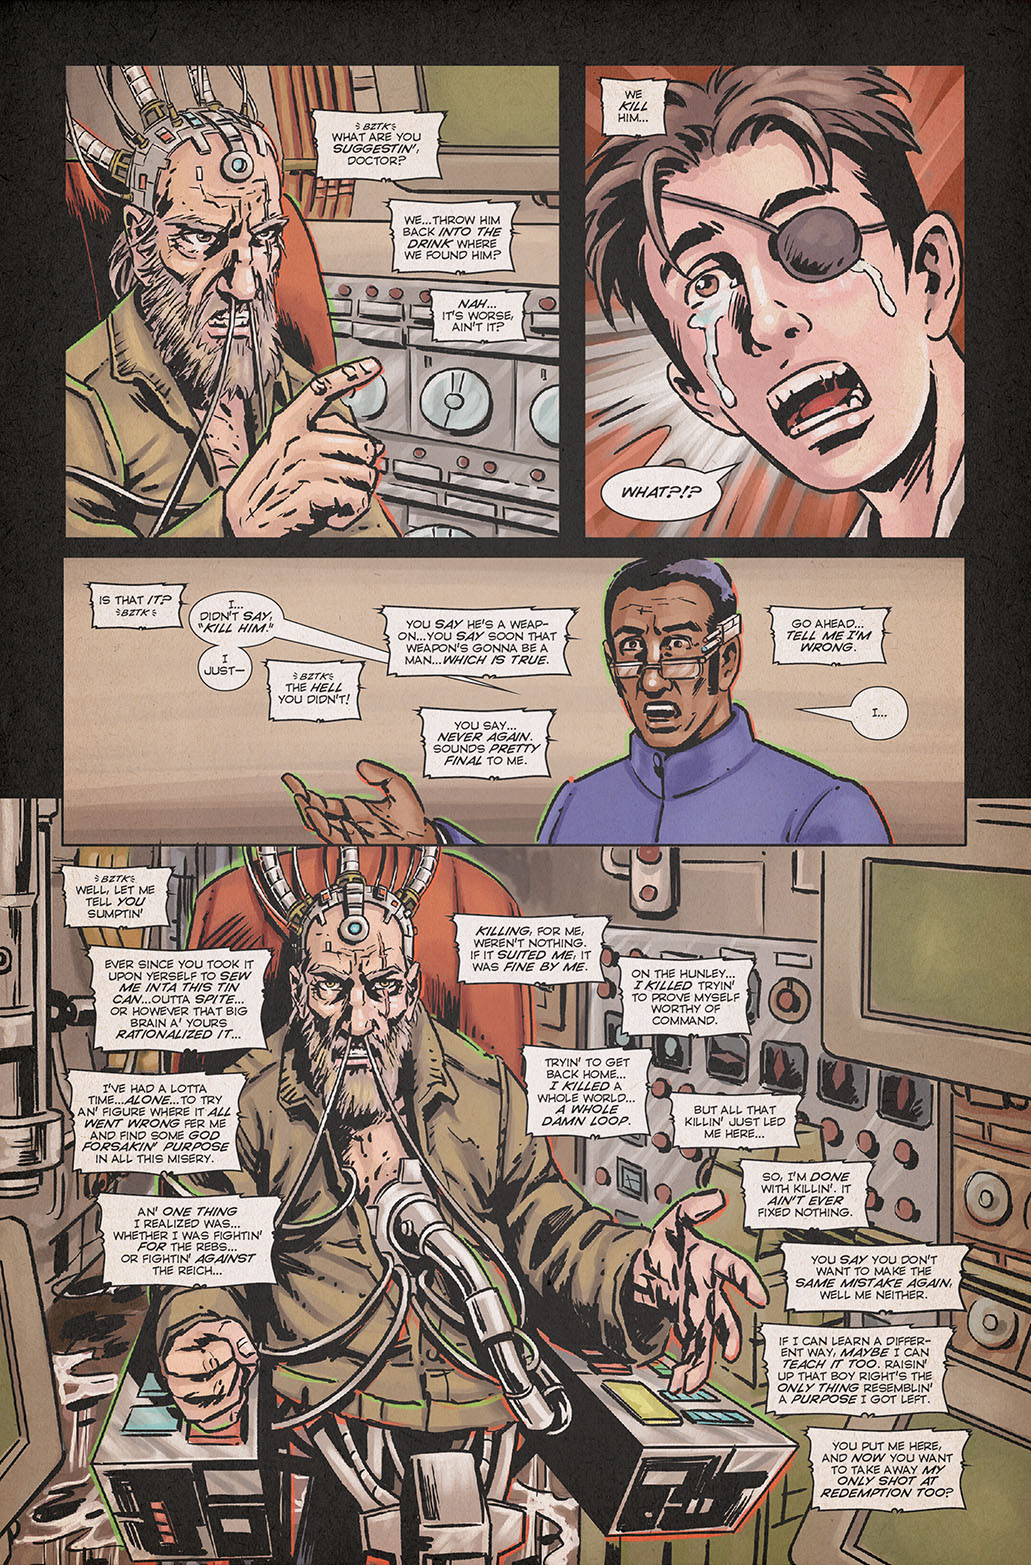 Our Fearful Trip is Done – Page 43